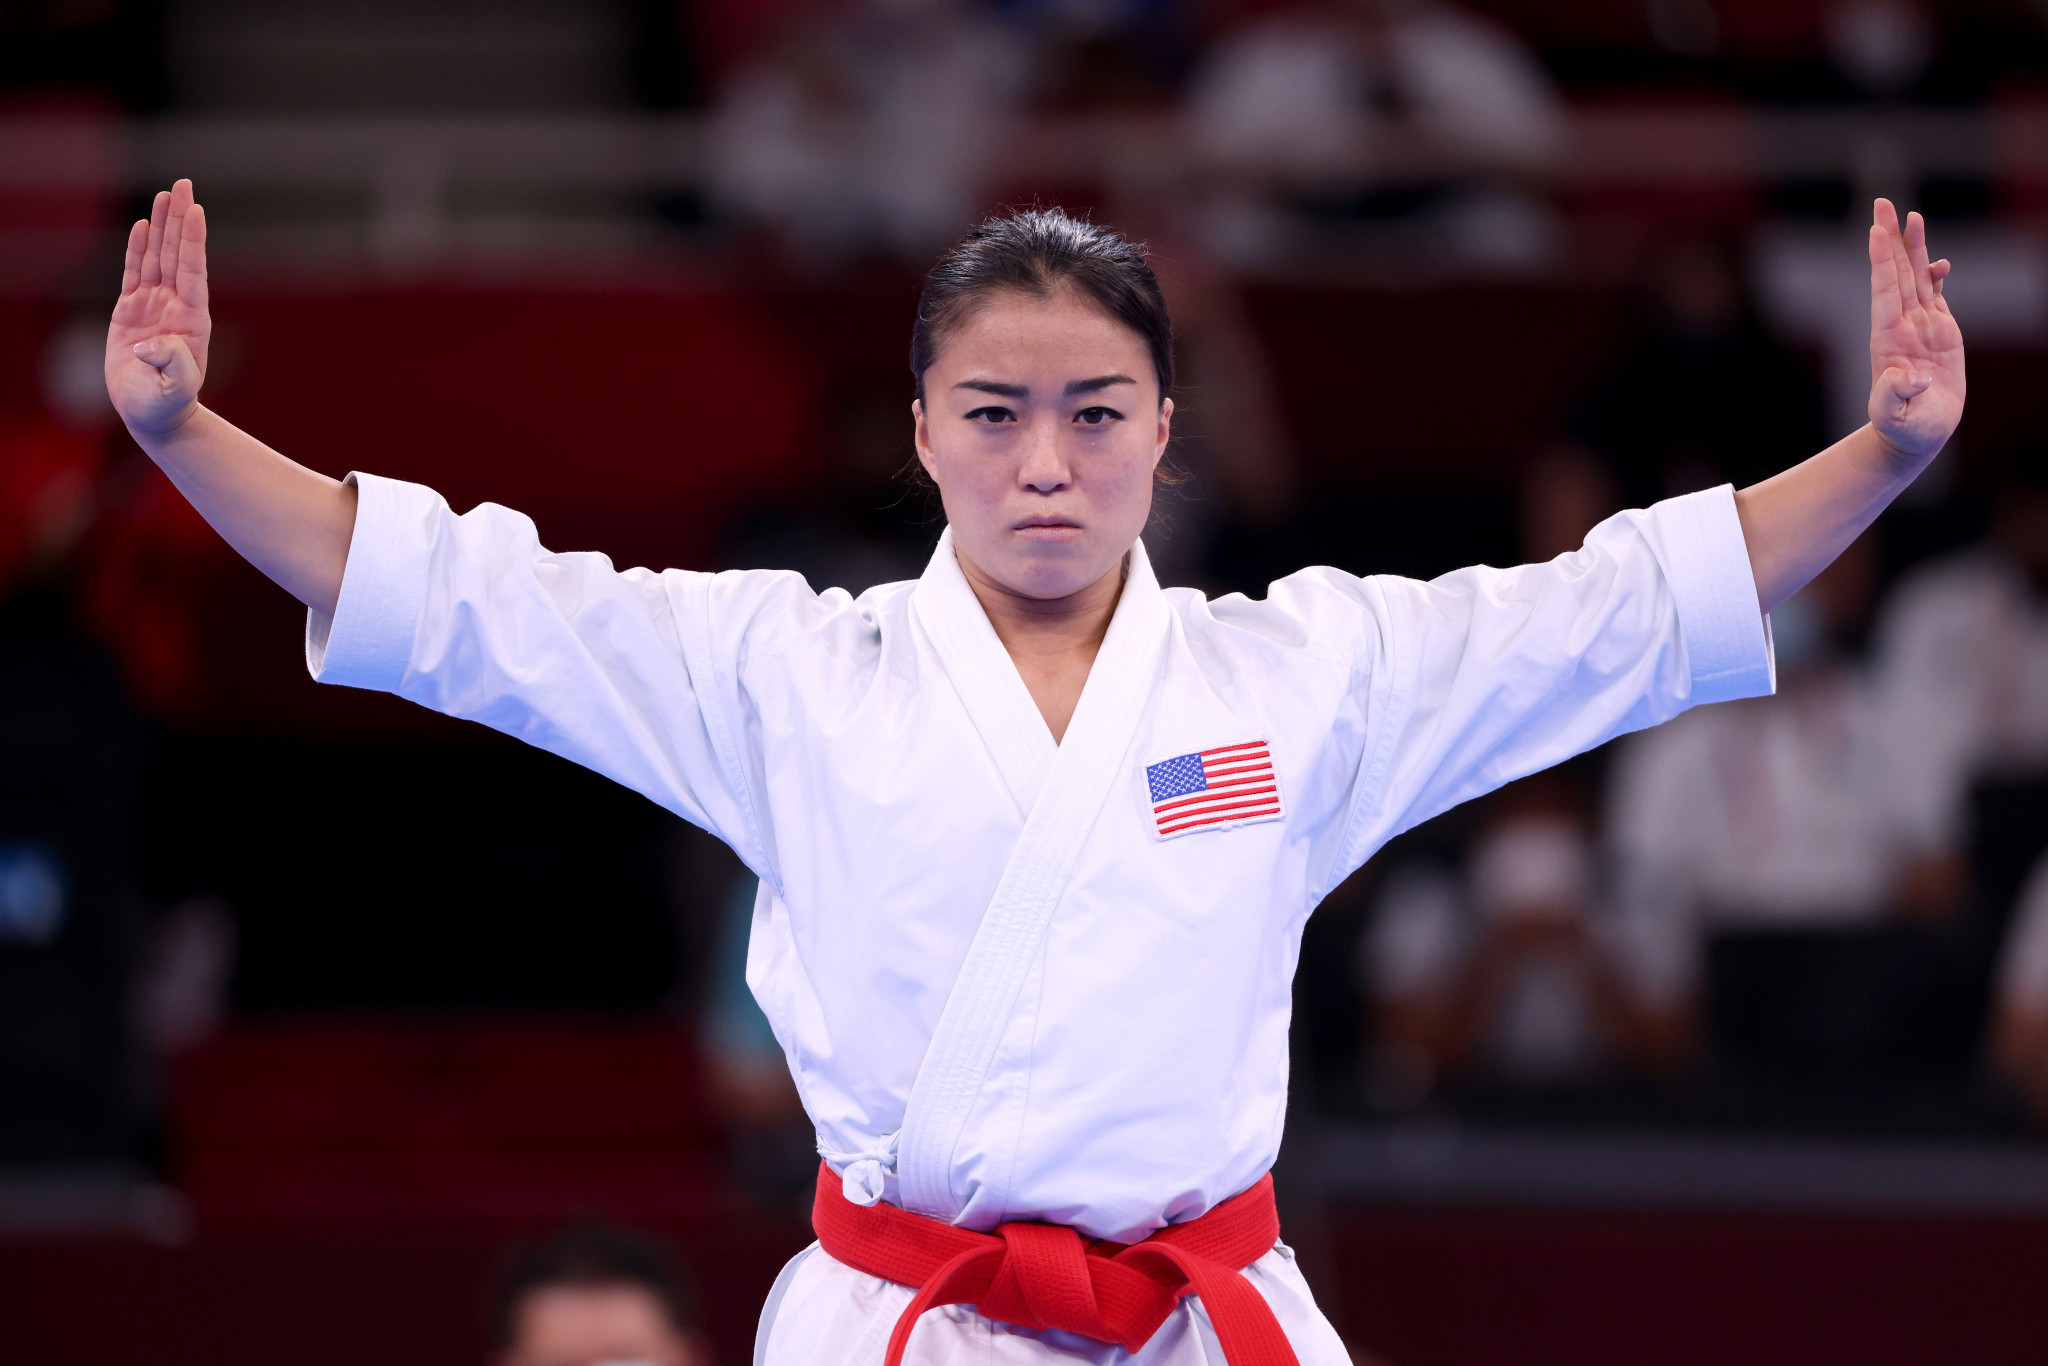 Sakura Kokumai of the United States won her eighth gold medal at the Pan American Karate Championships ©Getty Images